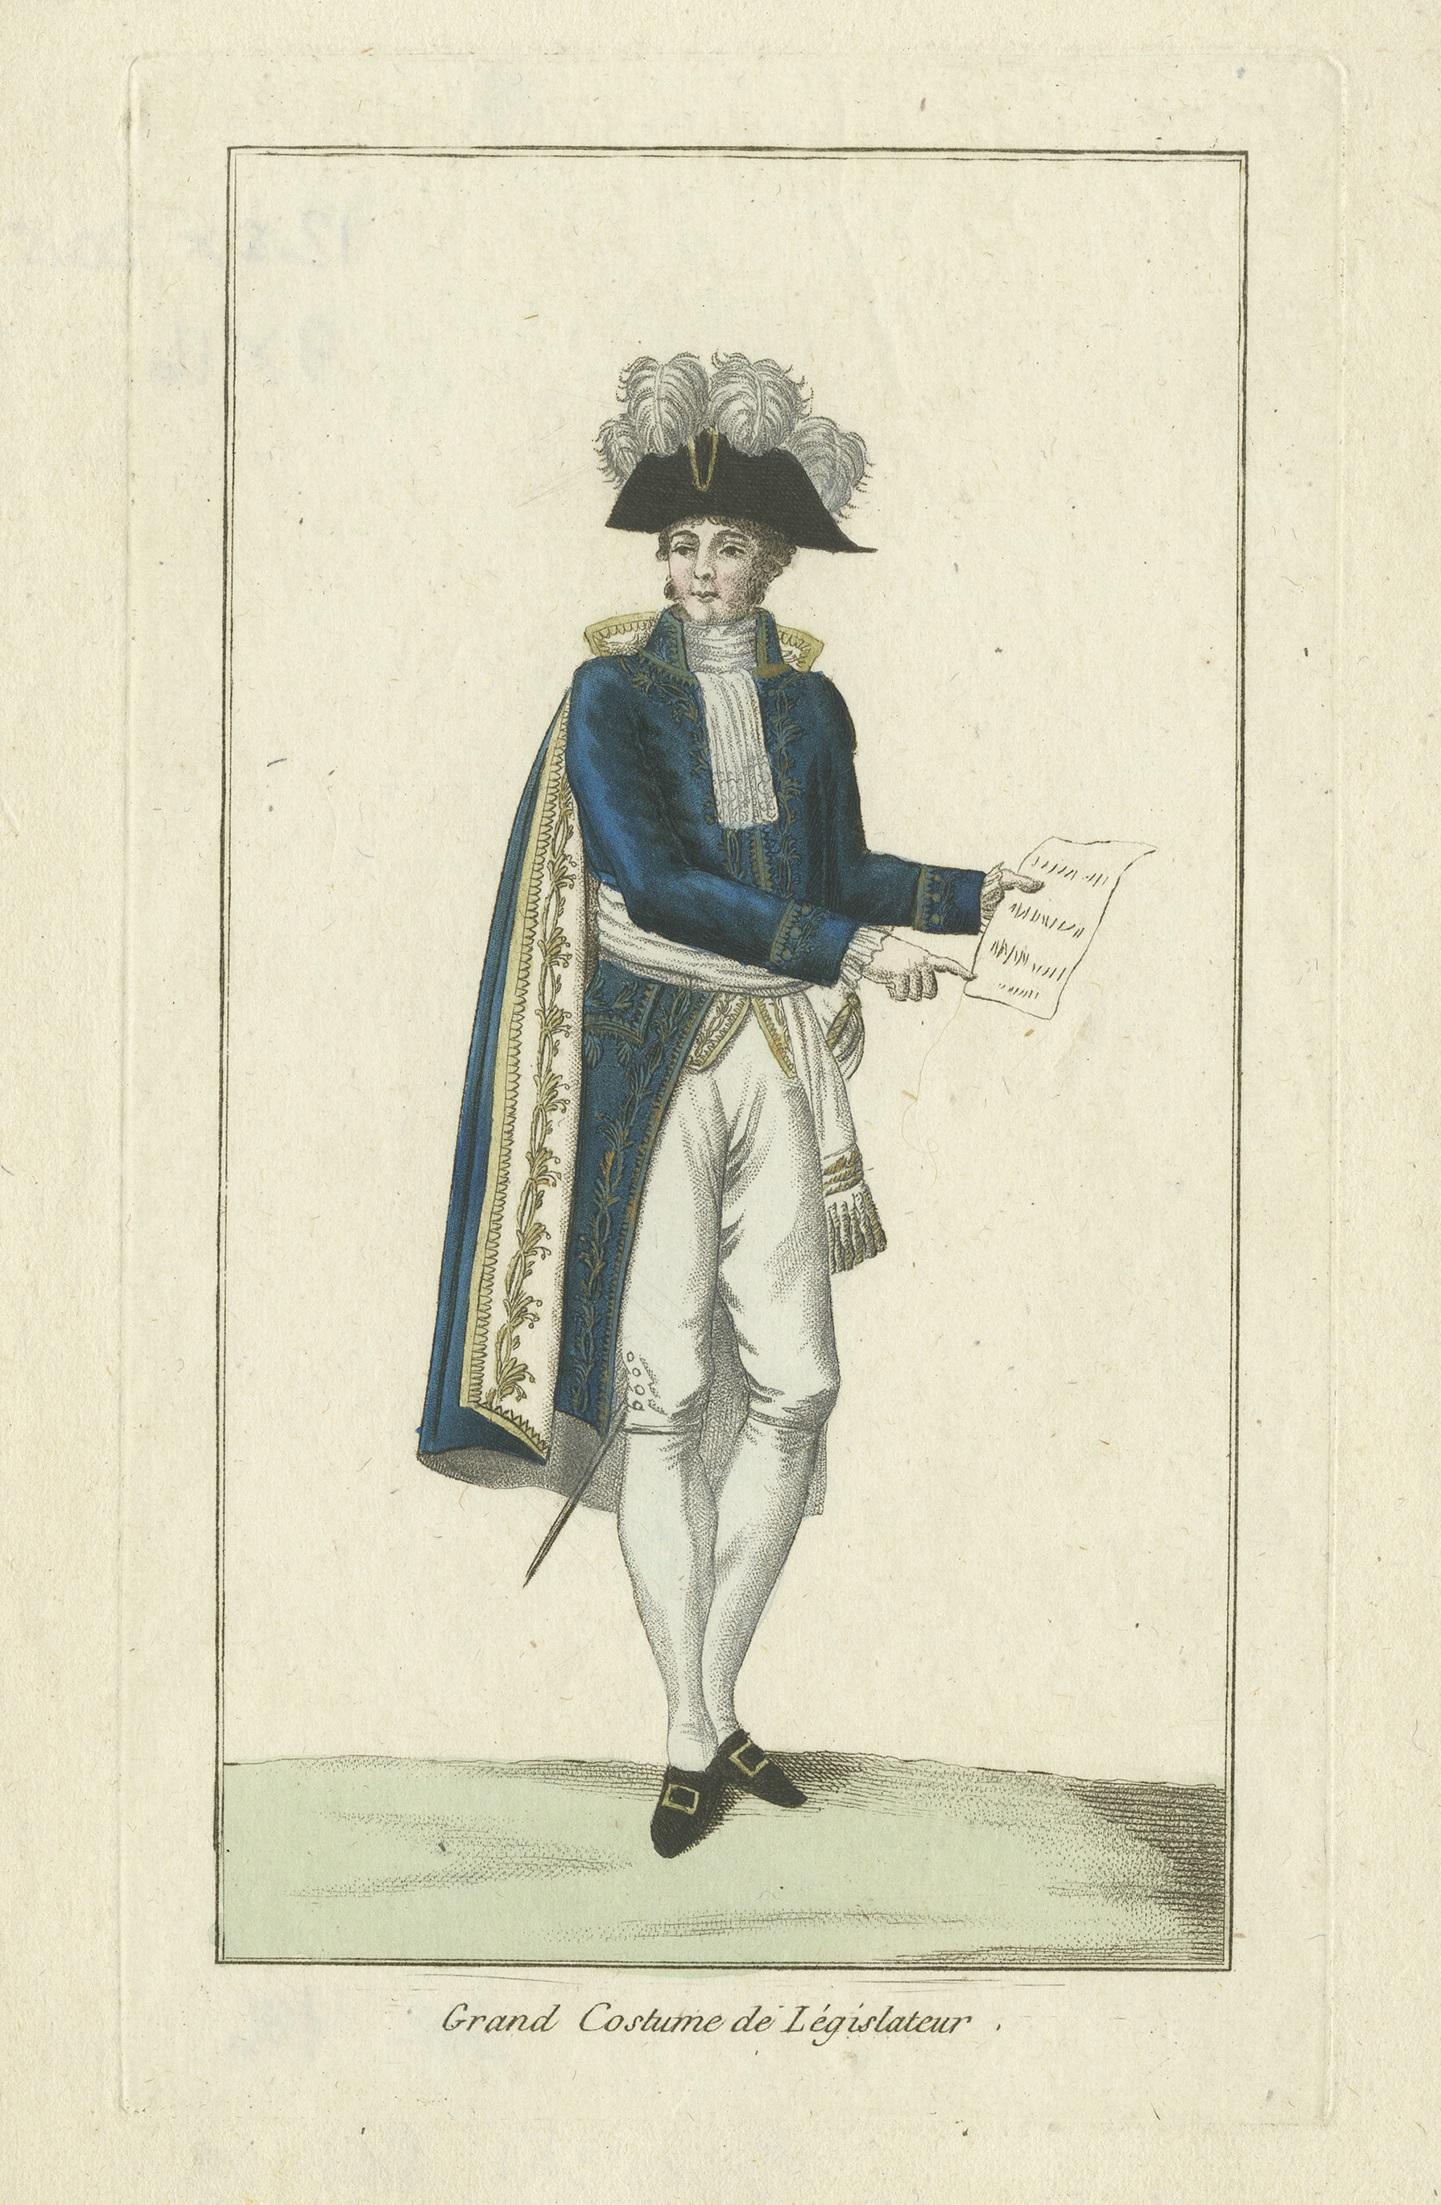 Antique print titled 'Grand Costume de Législateur'. Costume print of a French legislator. This print originates from a small booklet with engravings of French costumes.